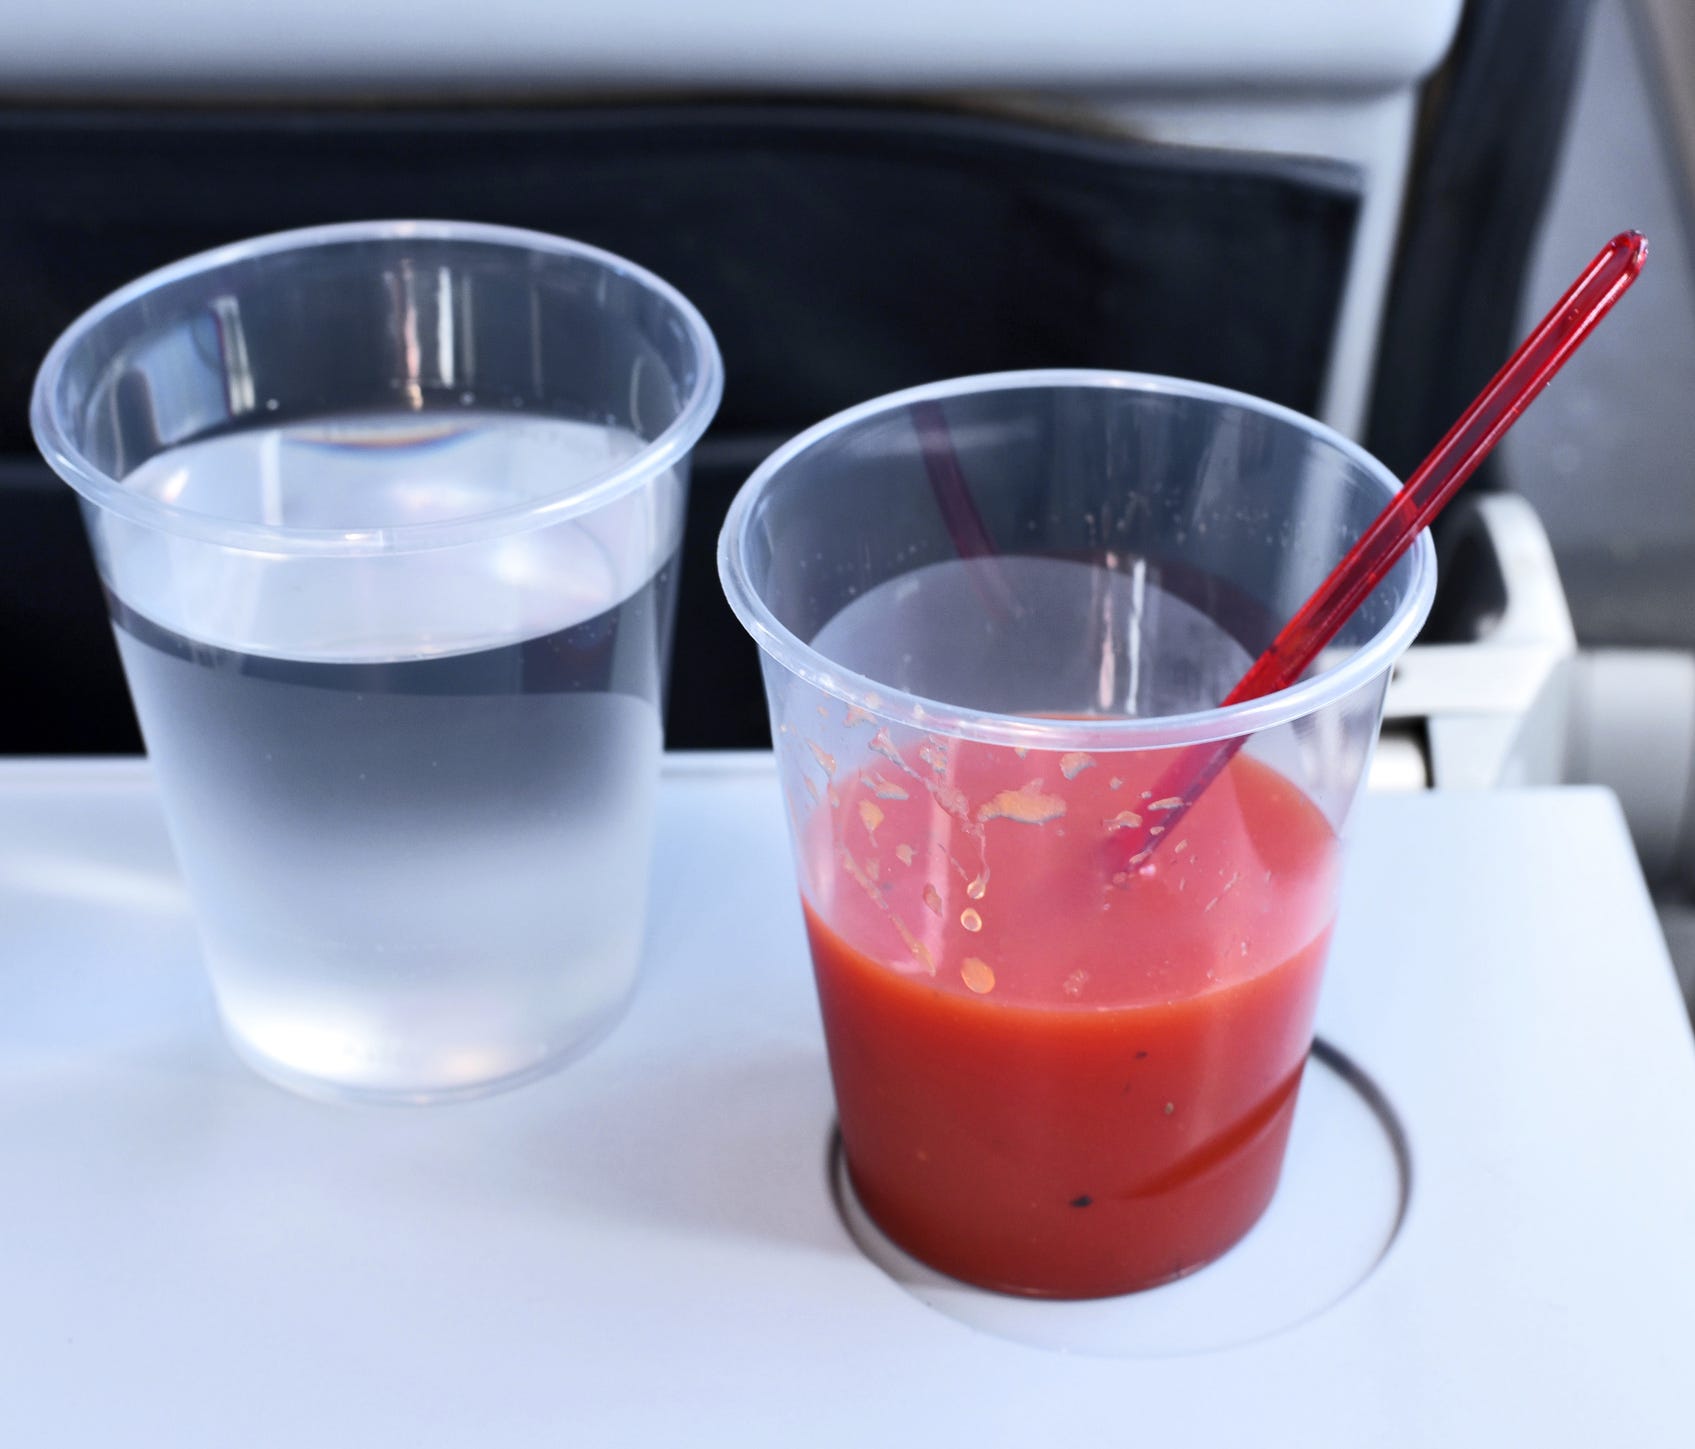 Drinks on a flight. Tomato juice and water glass on a table in an airplane.